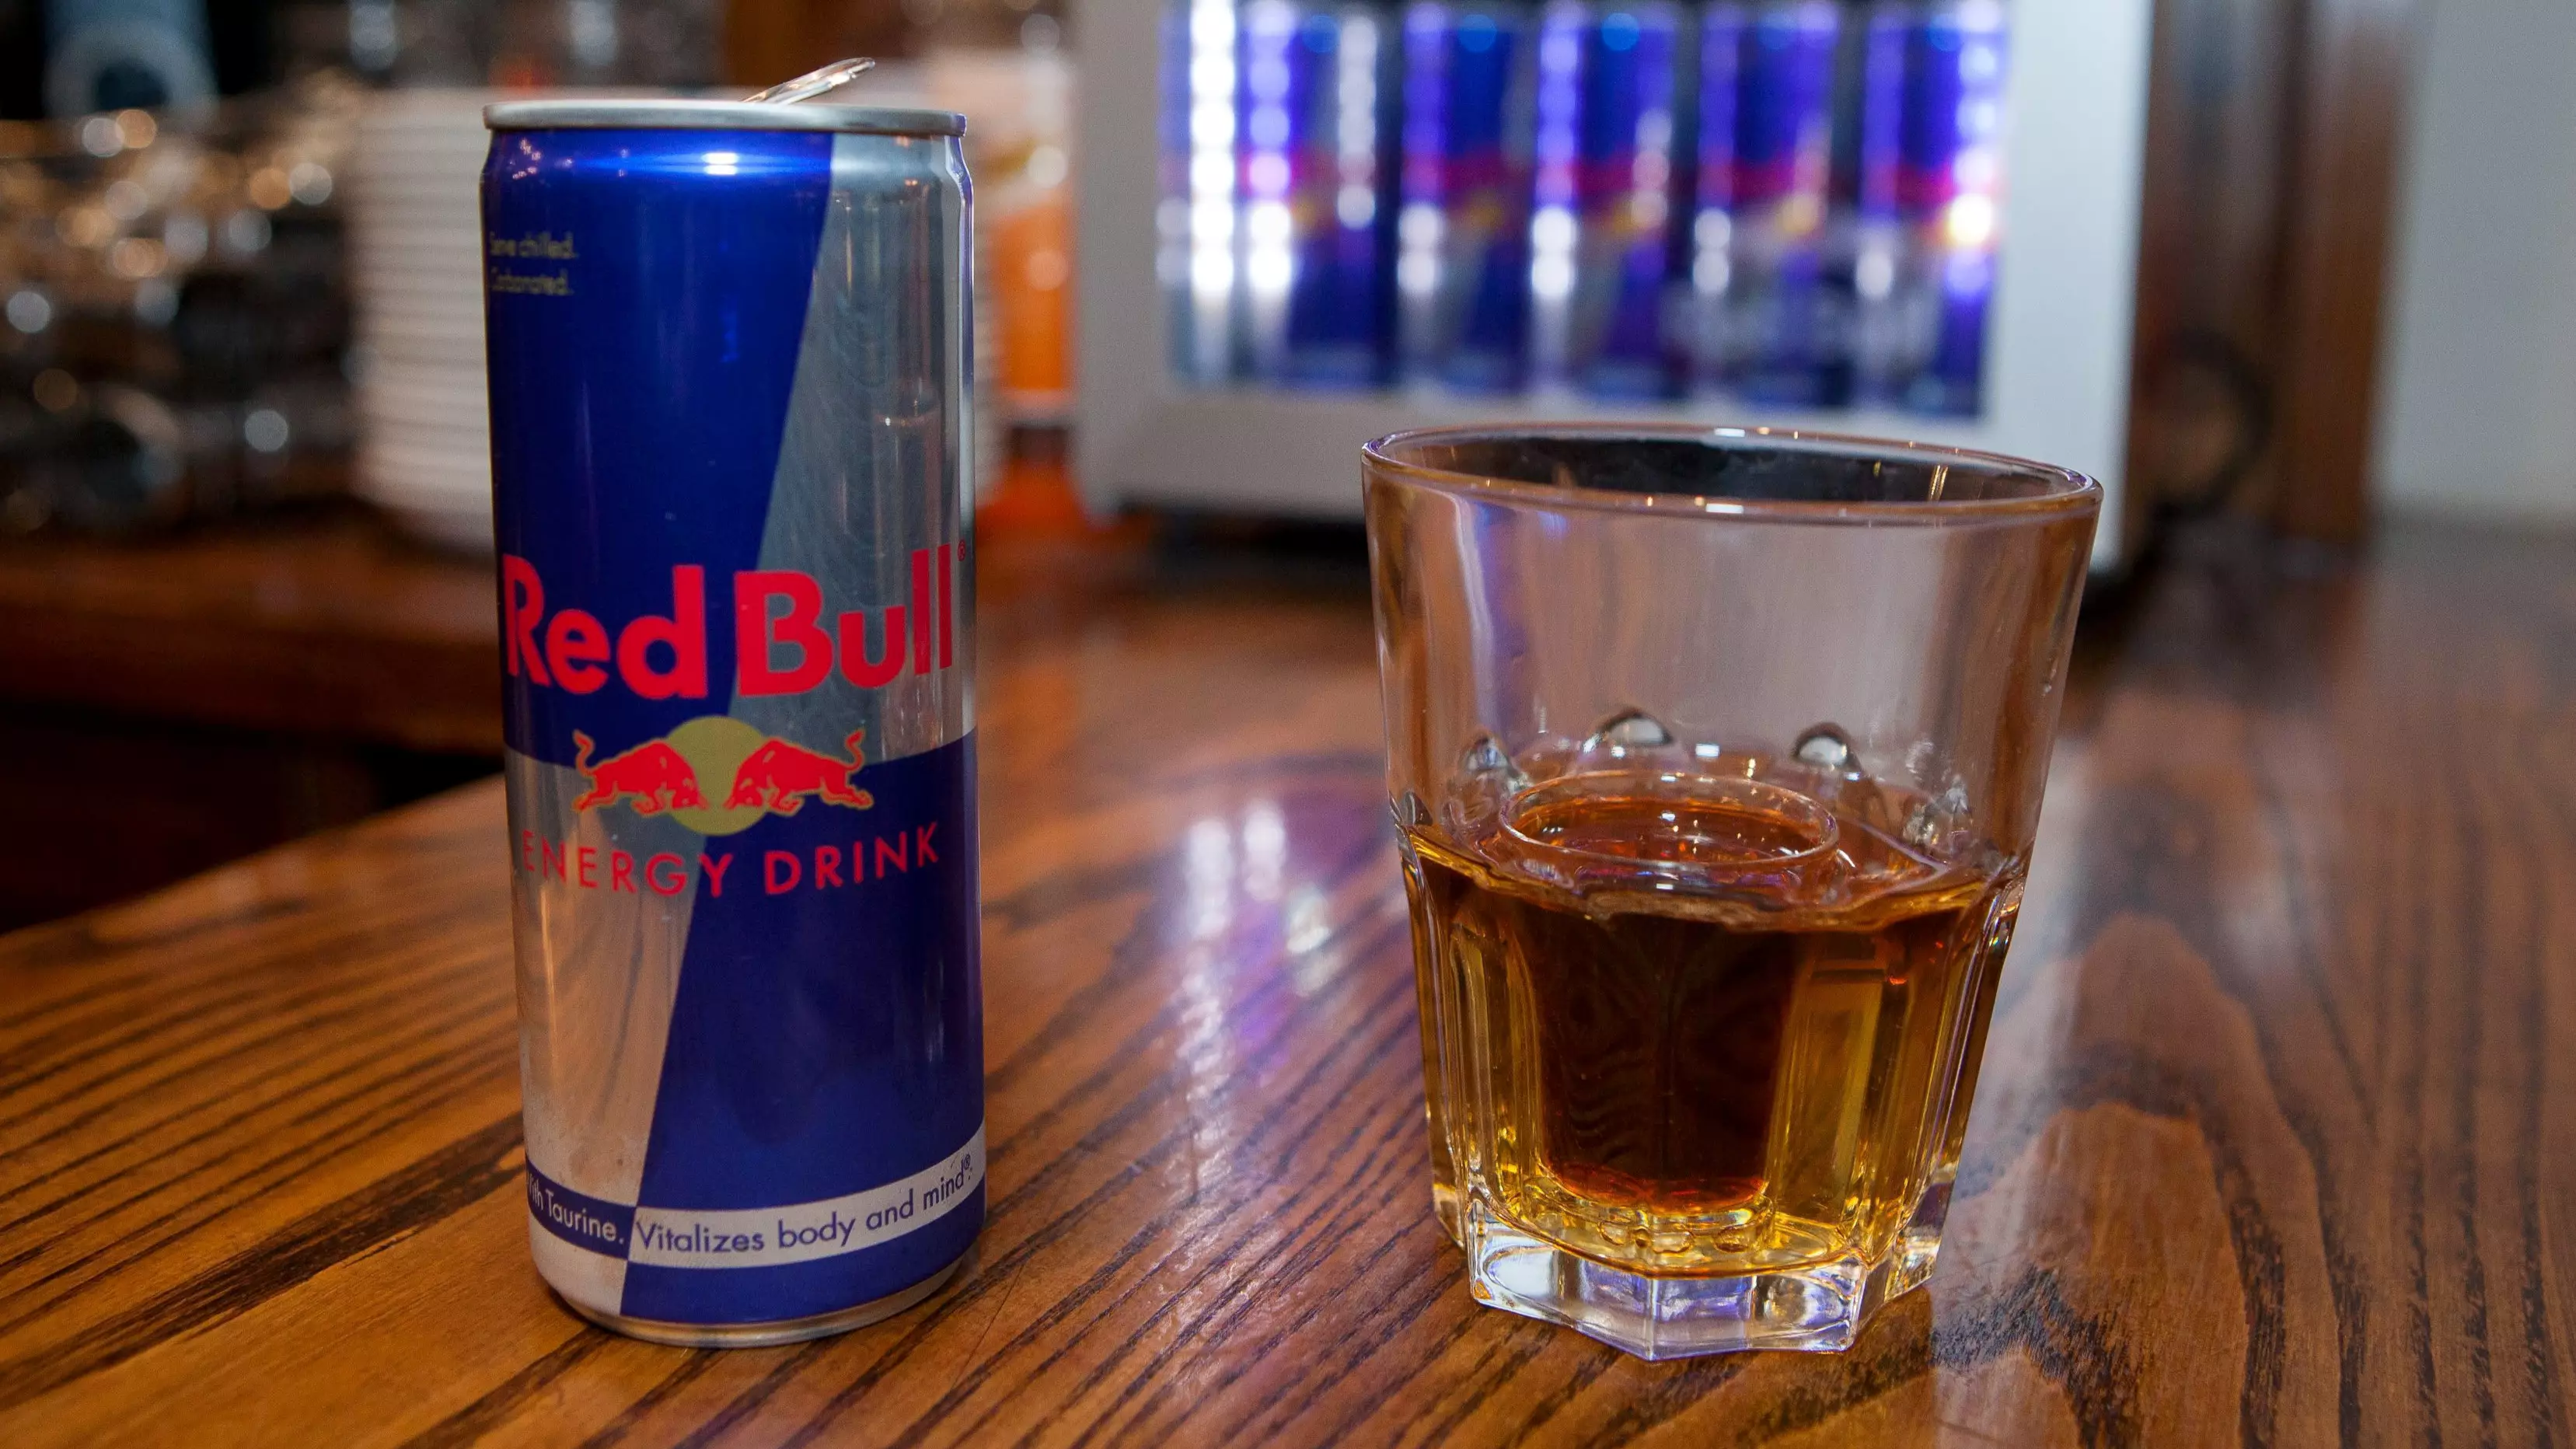 Man Threatened To Set Fire To A Nightclub Because They Didn't Sell Red Bull